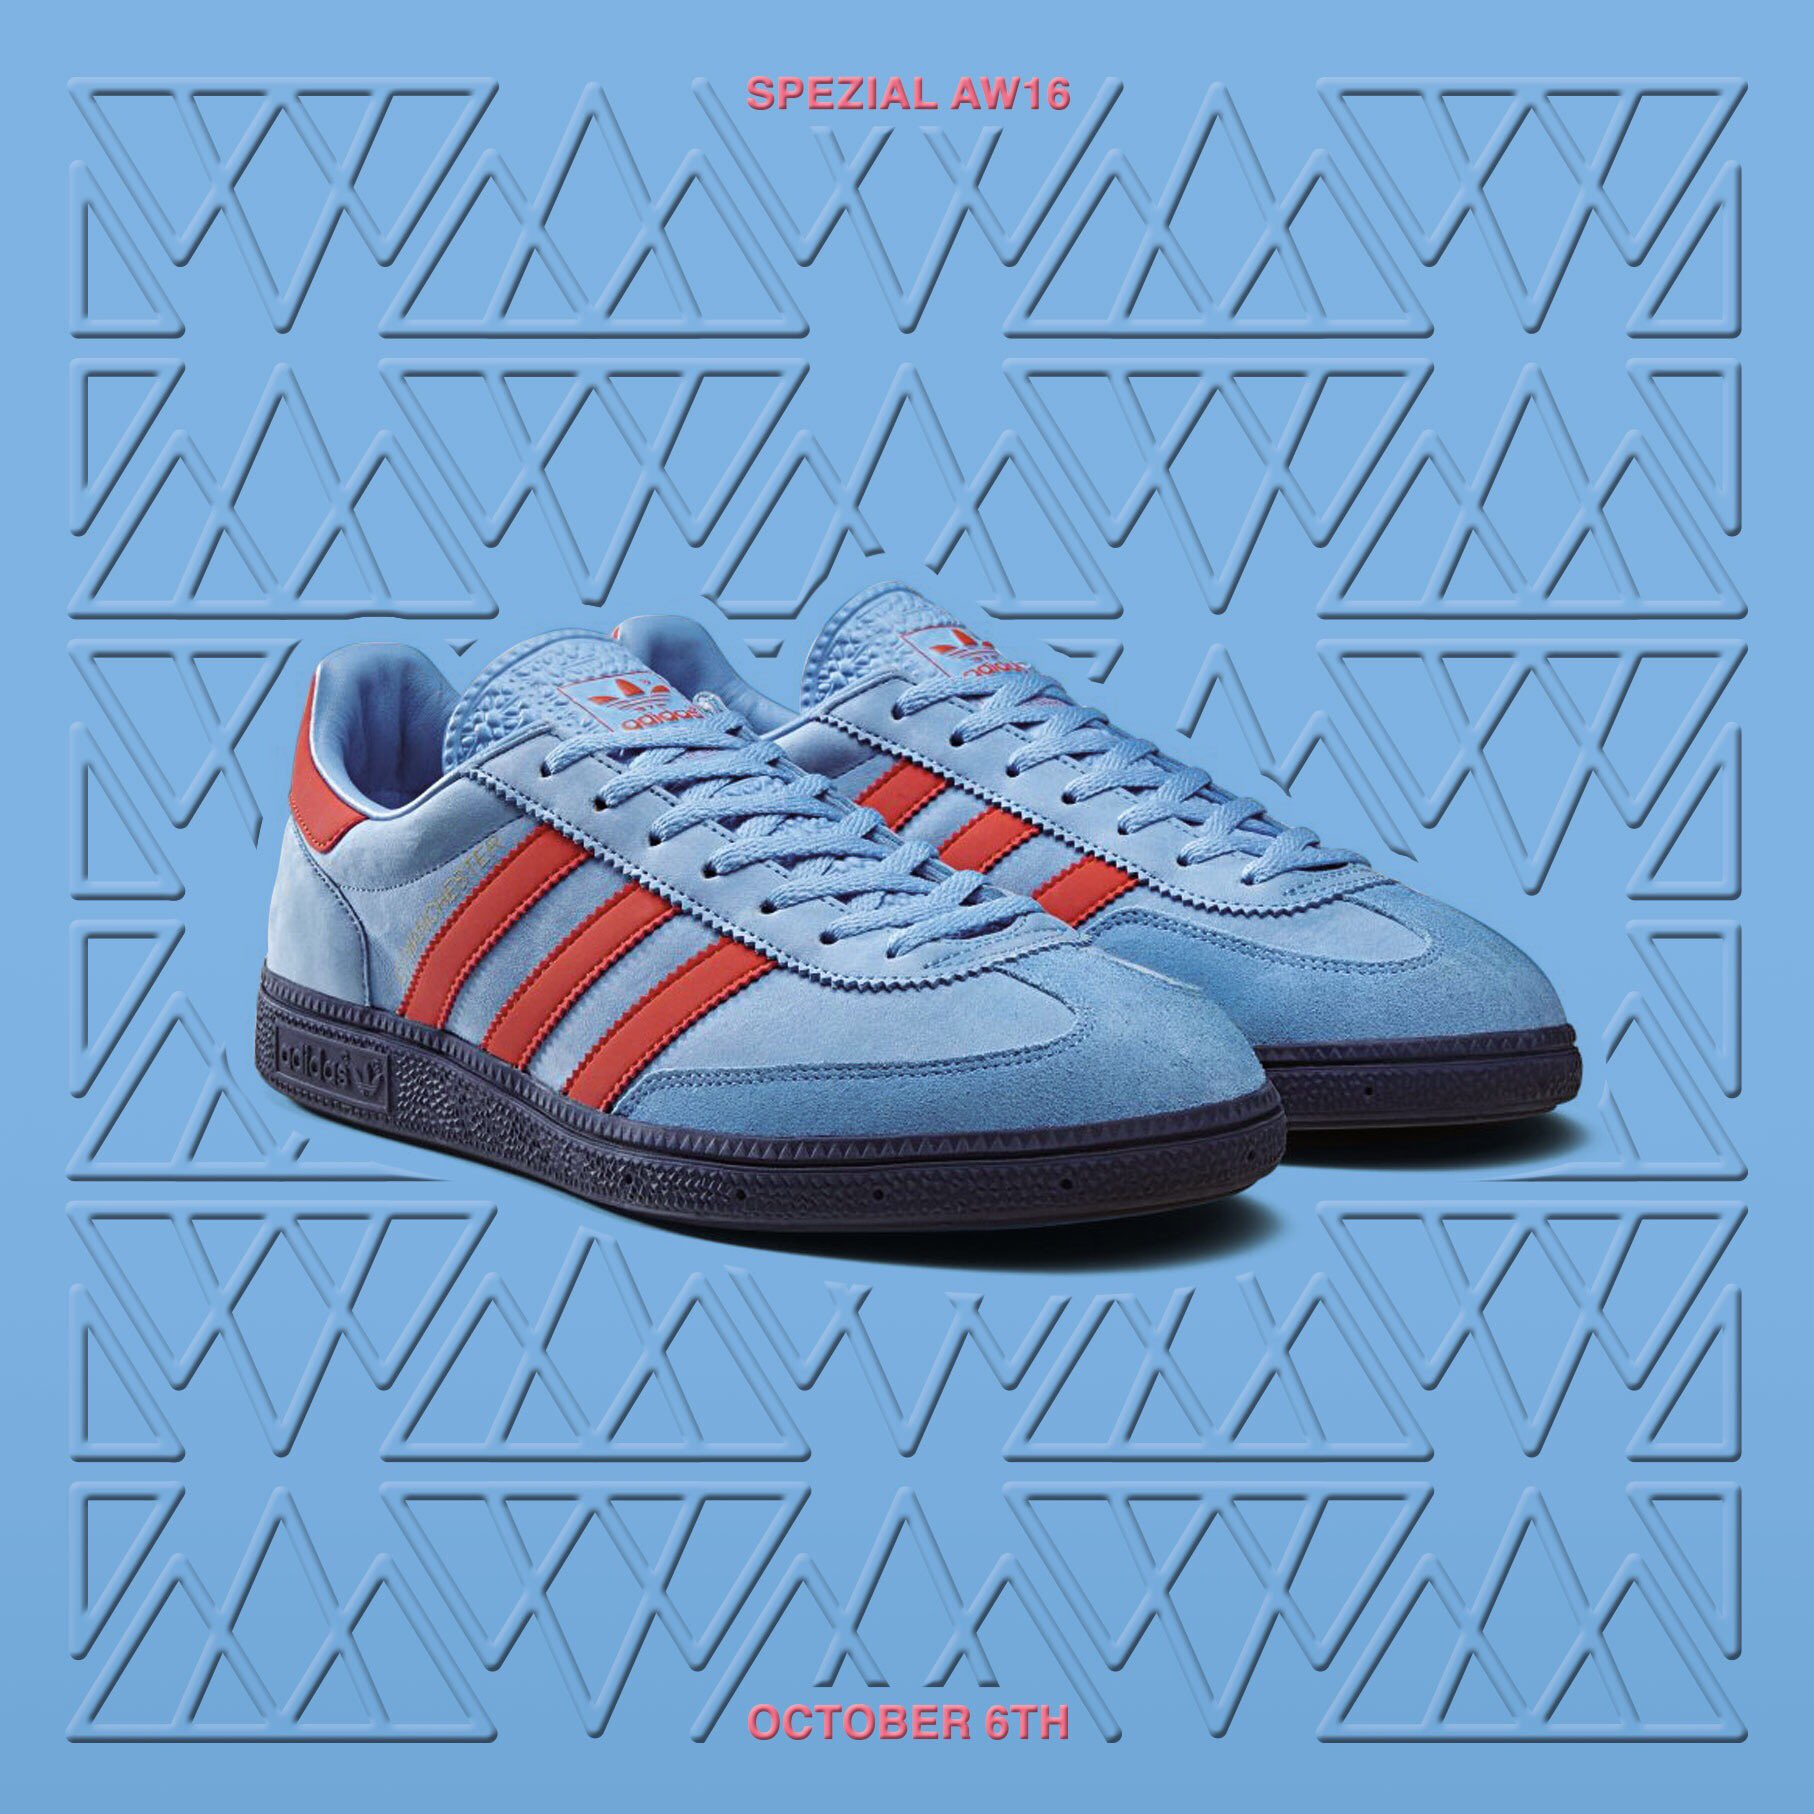 on Twitter: they are. GT Manchester SPZL from the adidas x Spezial AW16 collection. #adidas #SPZL #lacesoutfest https://t.co/i1q992fMG4" / Twitter